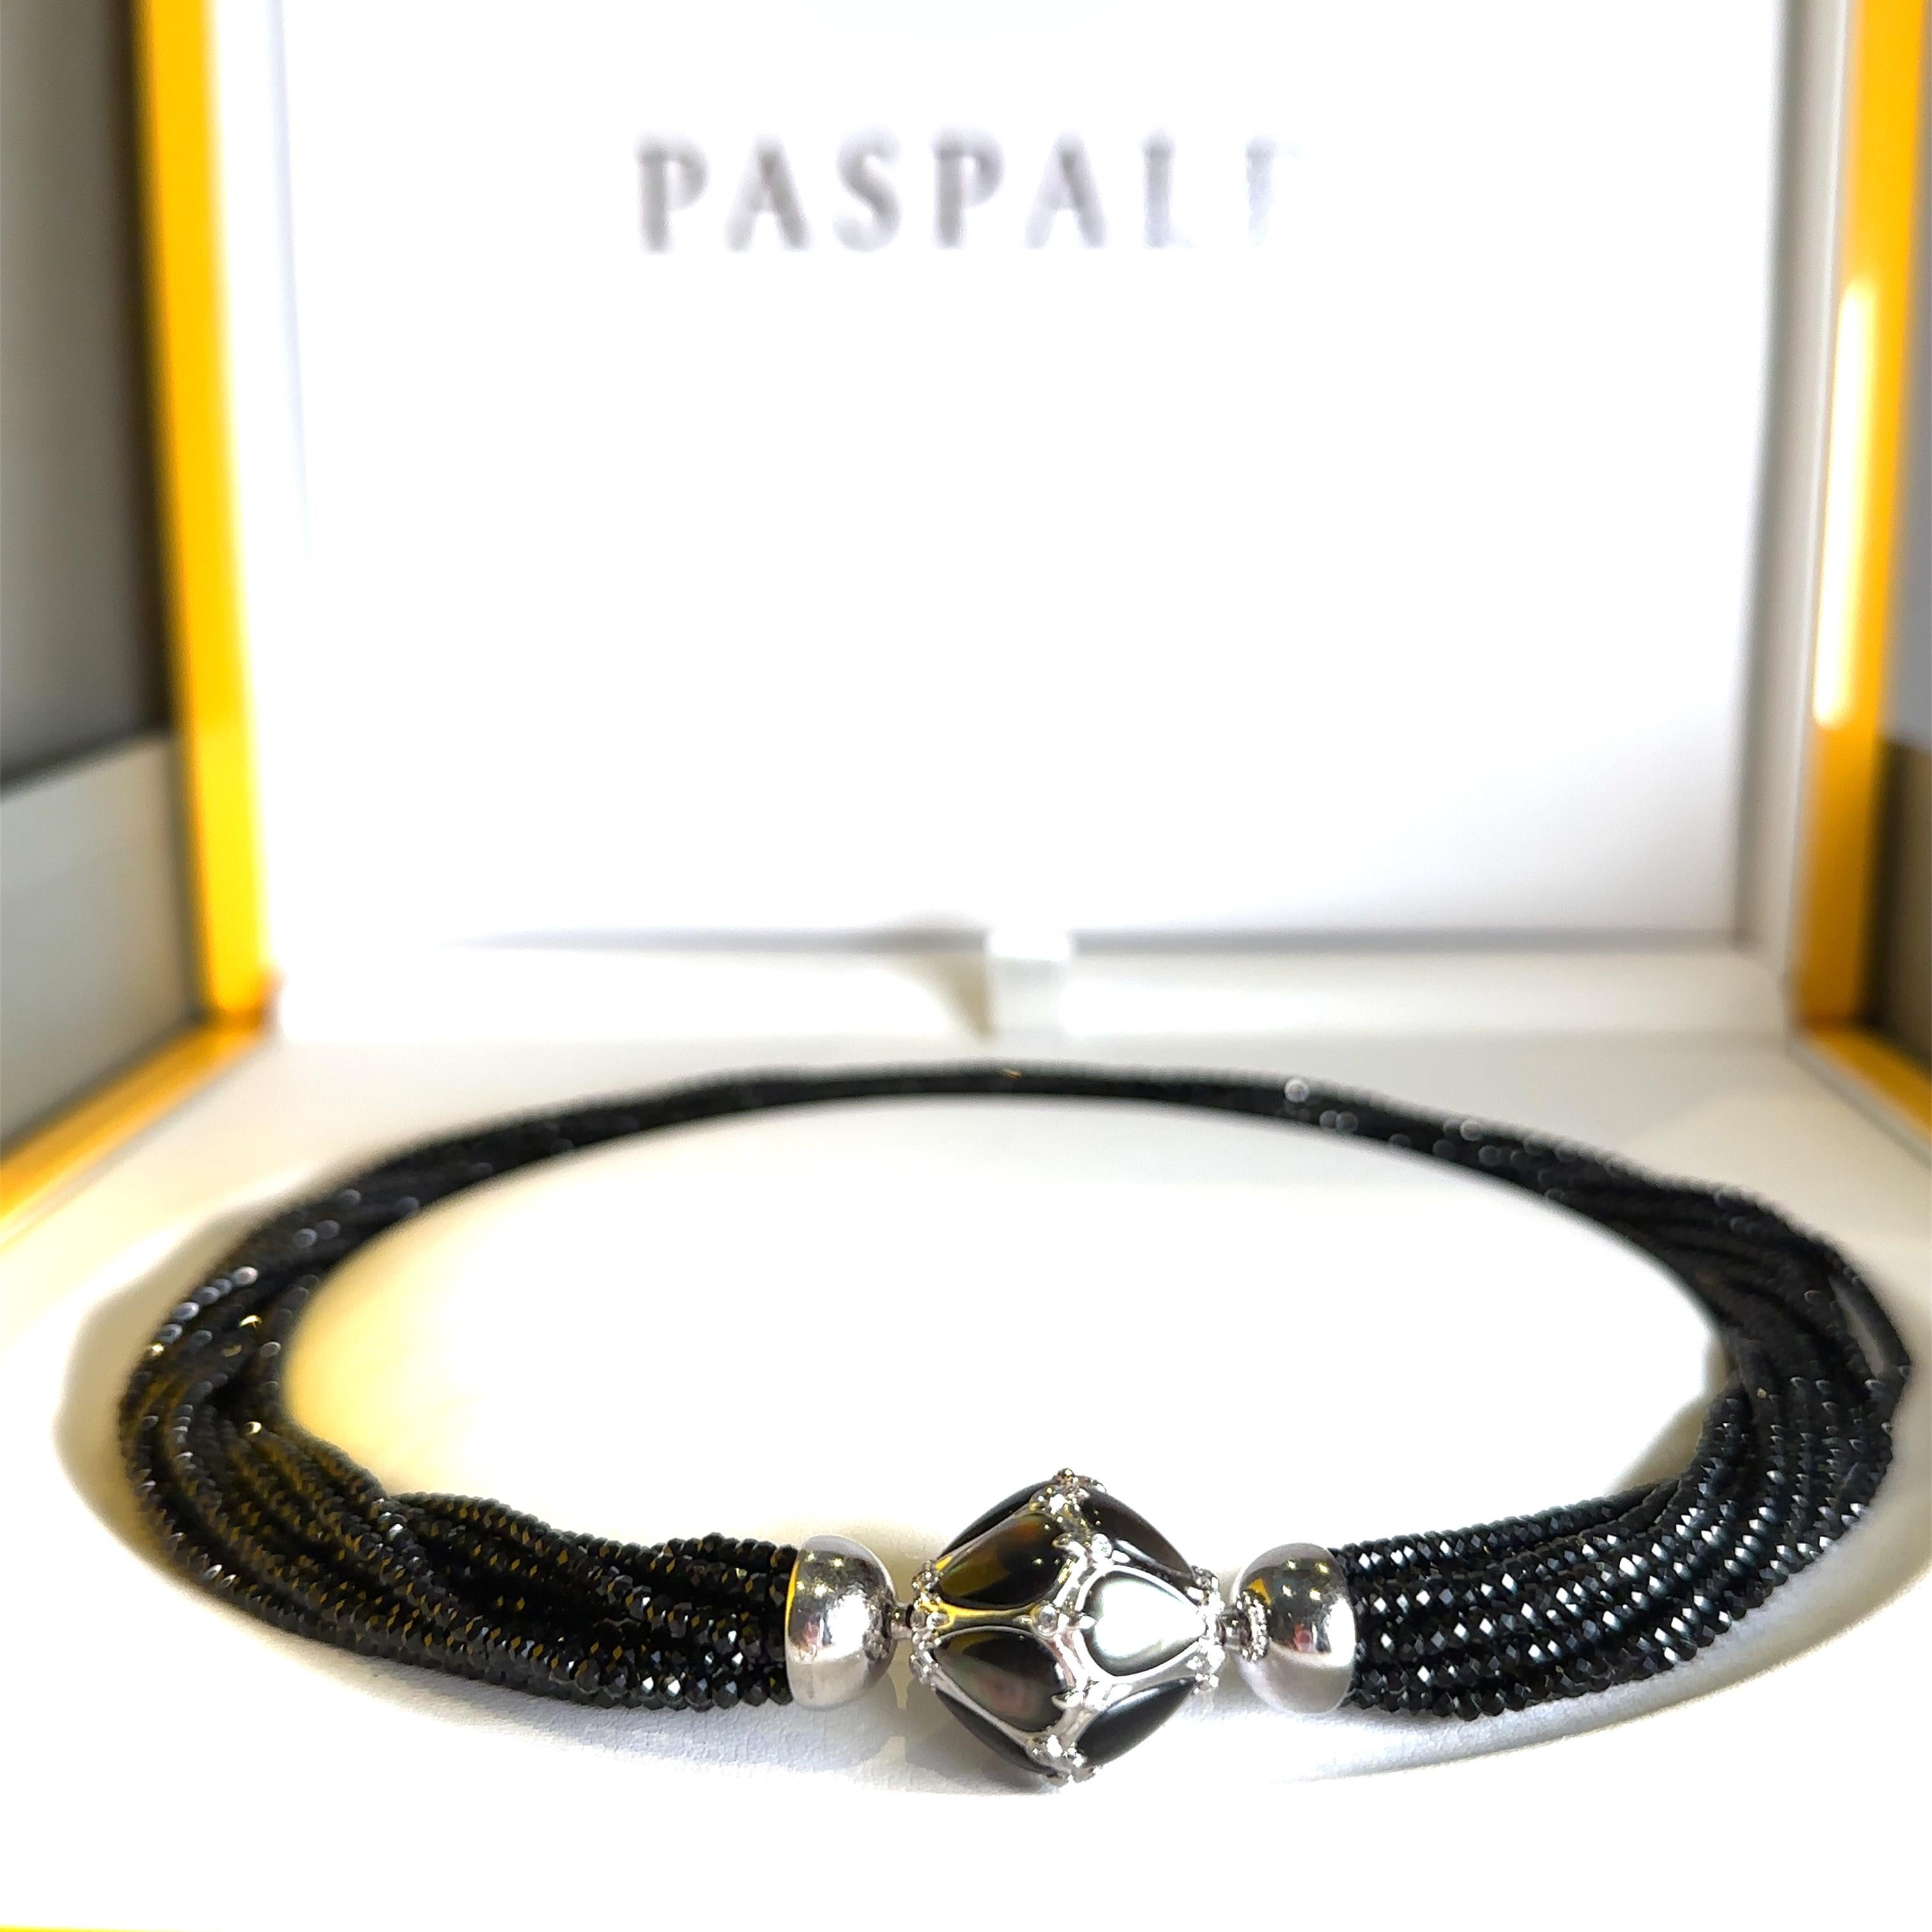 Unique features: 

A Paspaley Black Spinel Necklace with Mother of Pearl Clasp designed with twelve strands of faceted beads terminating to an 18ct White Gold diamond and black mother of pearl clasp.

Metal: 18ct White Gold
Carat: N/A
Colour: